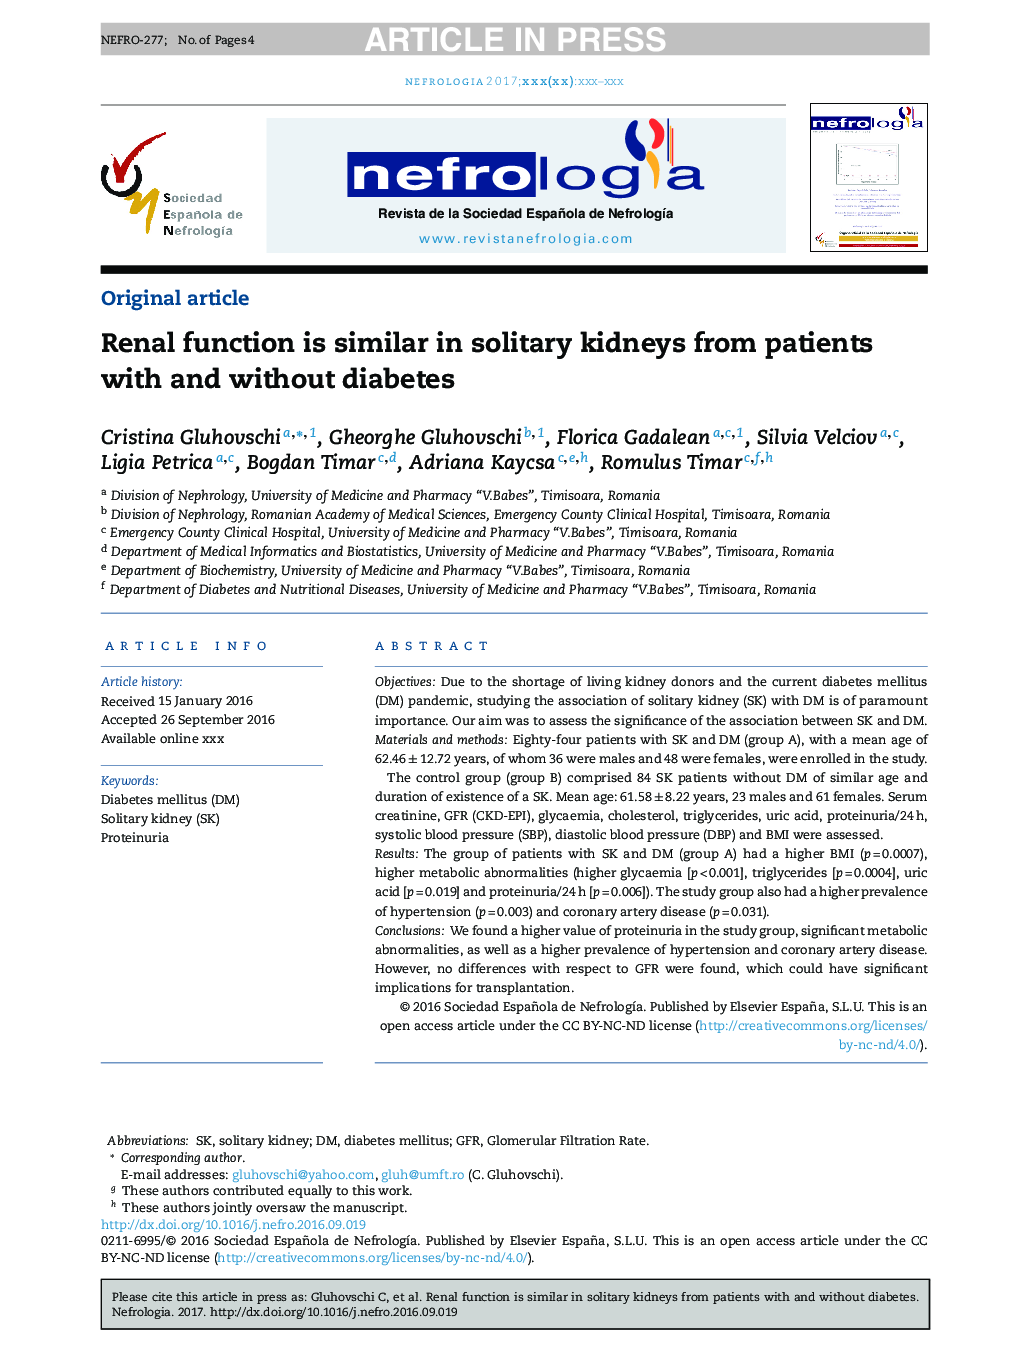 Renal function is similar in solitary kidneys from patients with and without diabetes